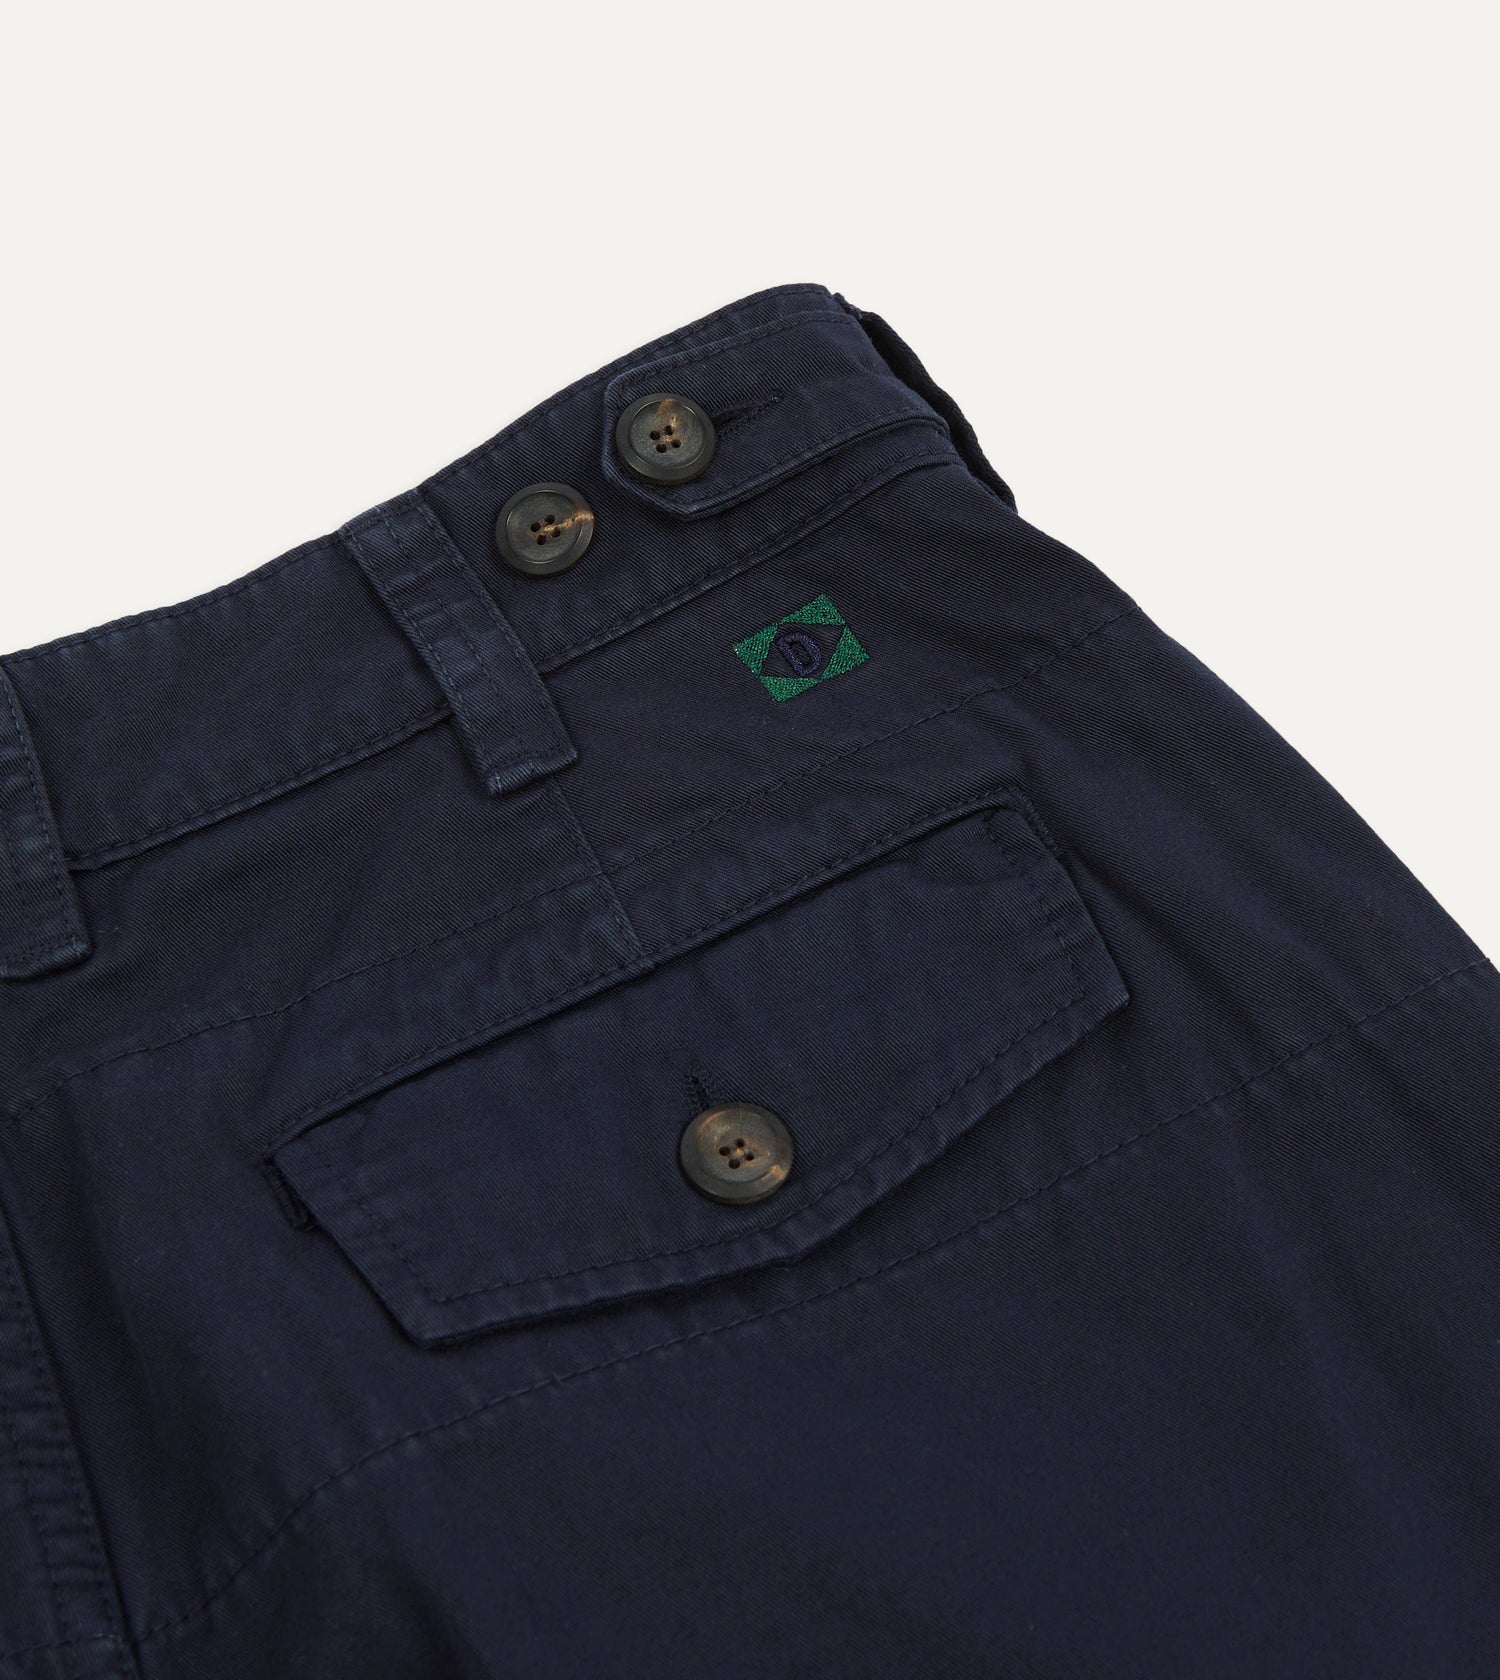 Navy Cotton Flat Front Chino